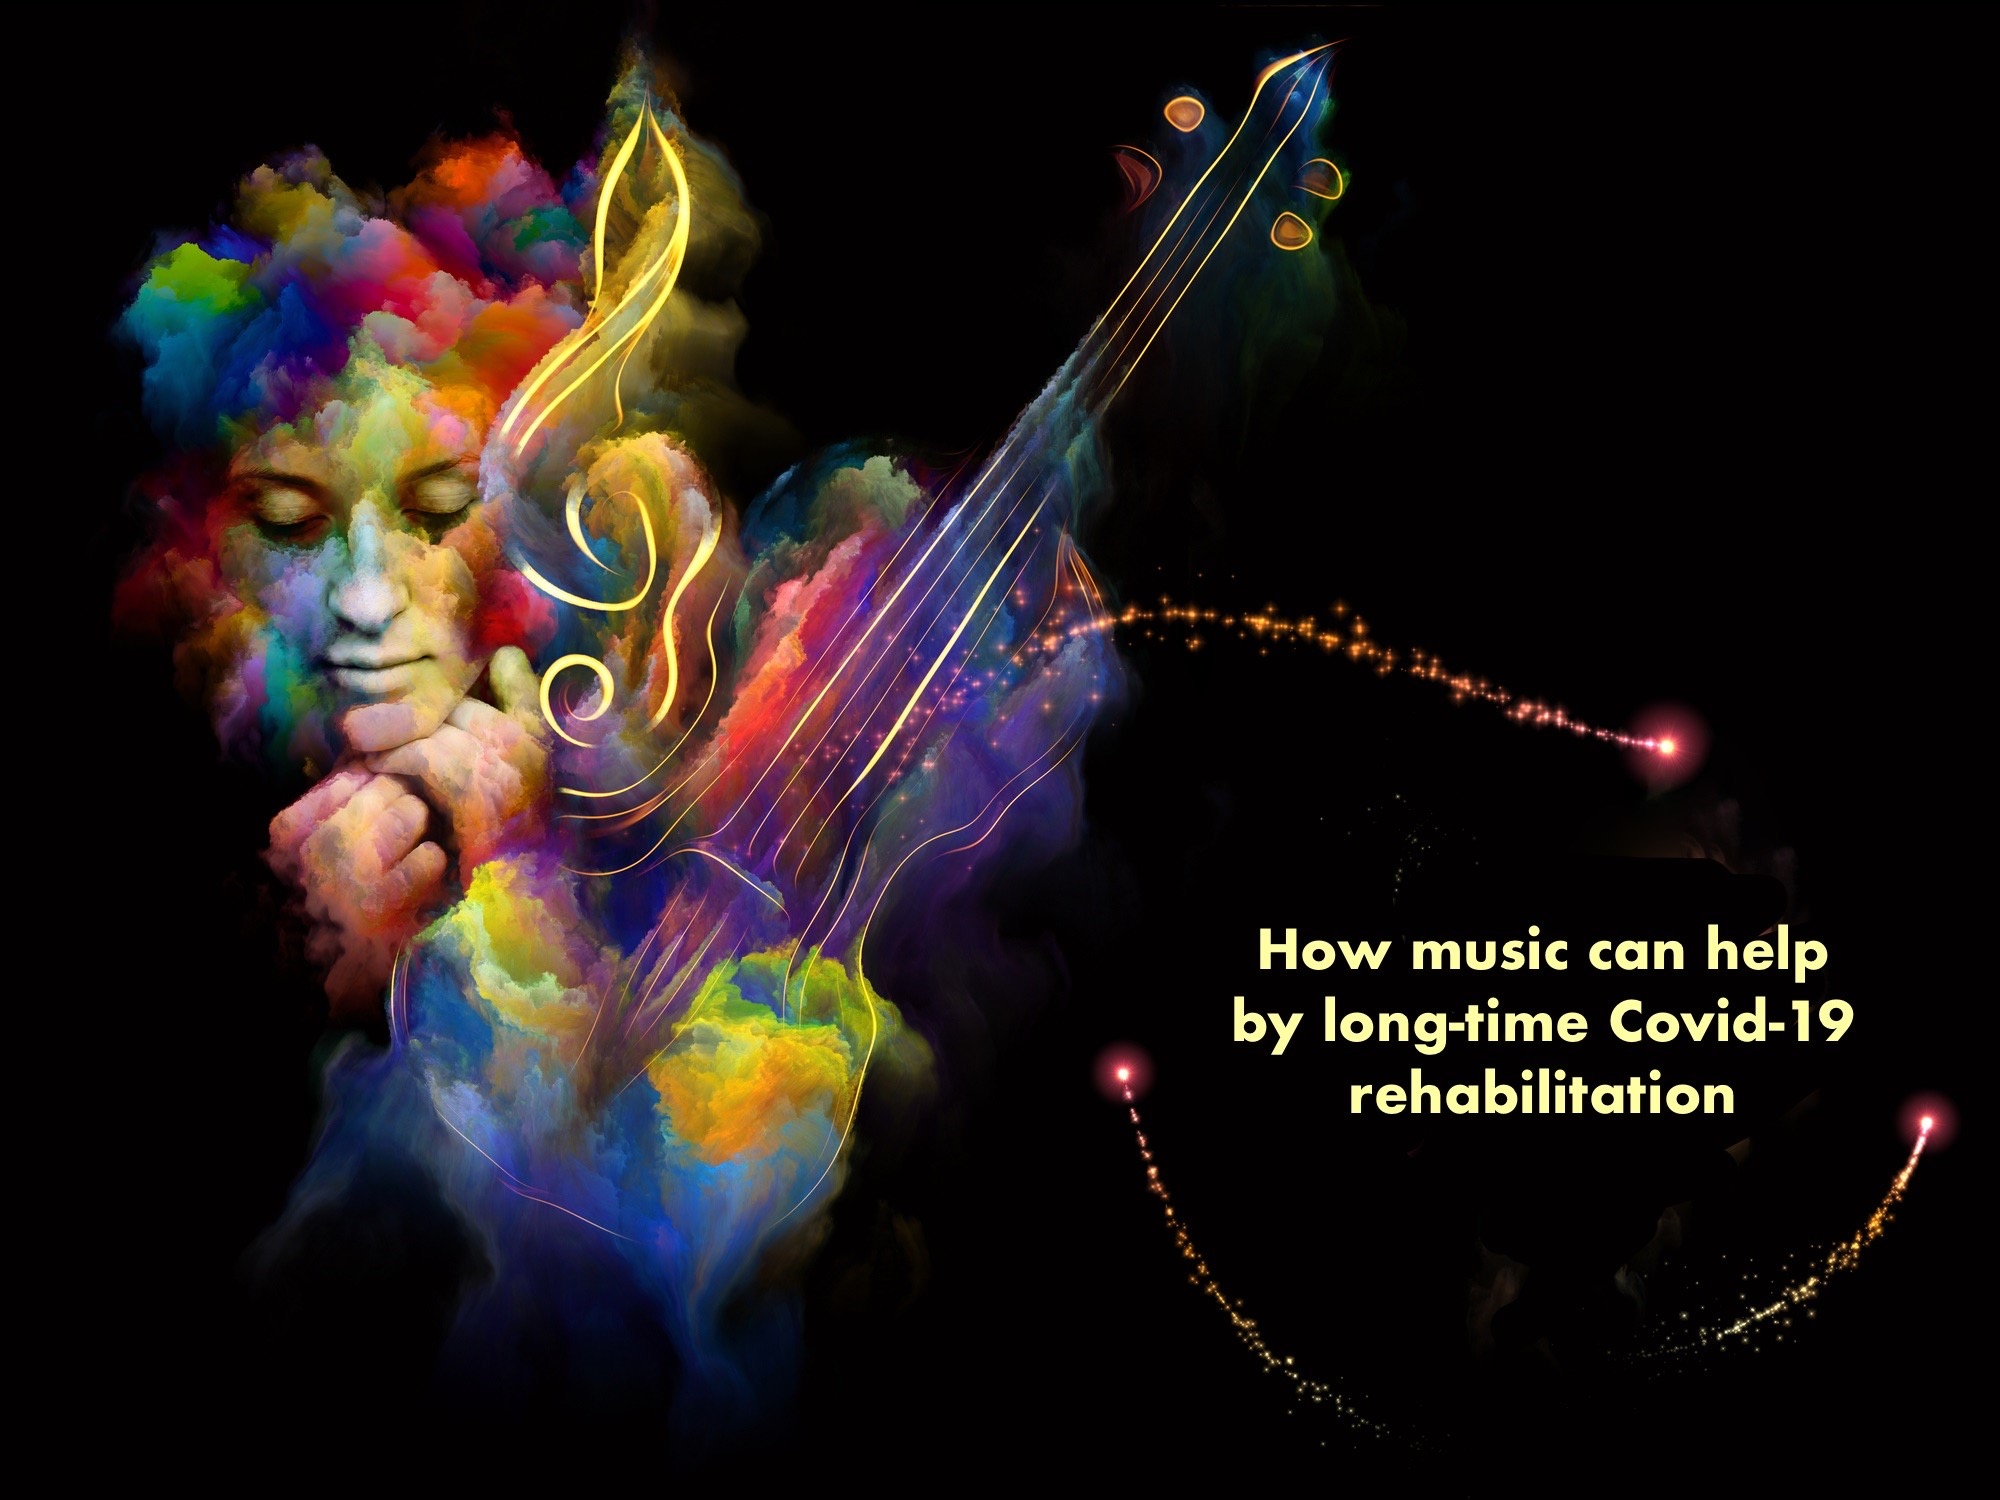 How music can help in long Covid-19 rehabilitation featured image